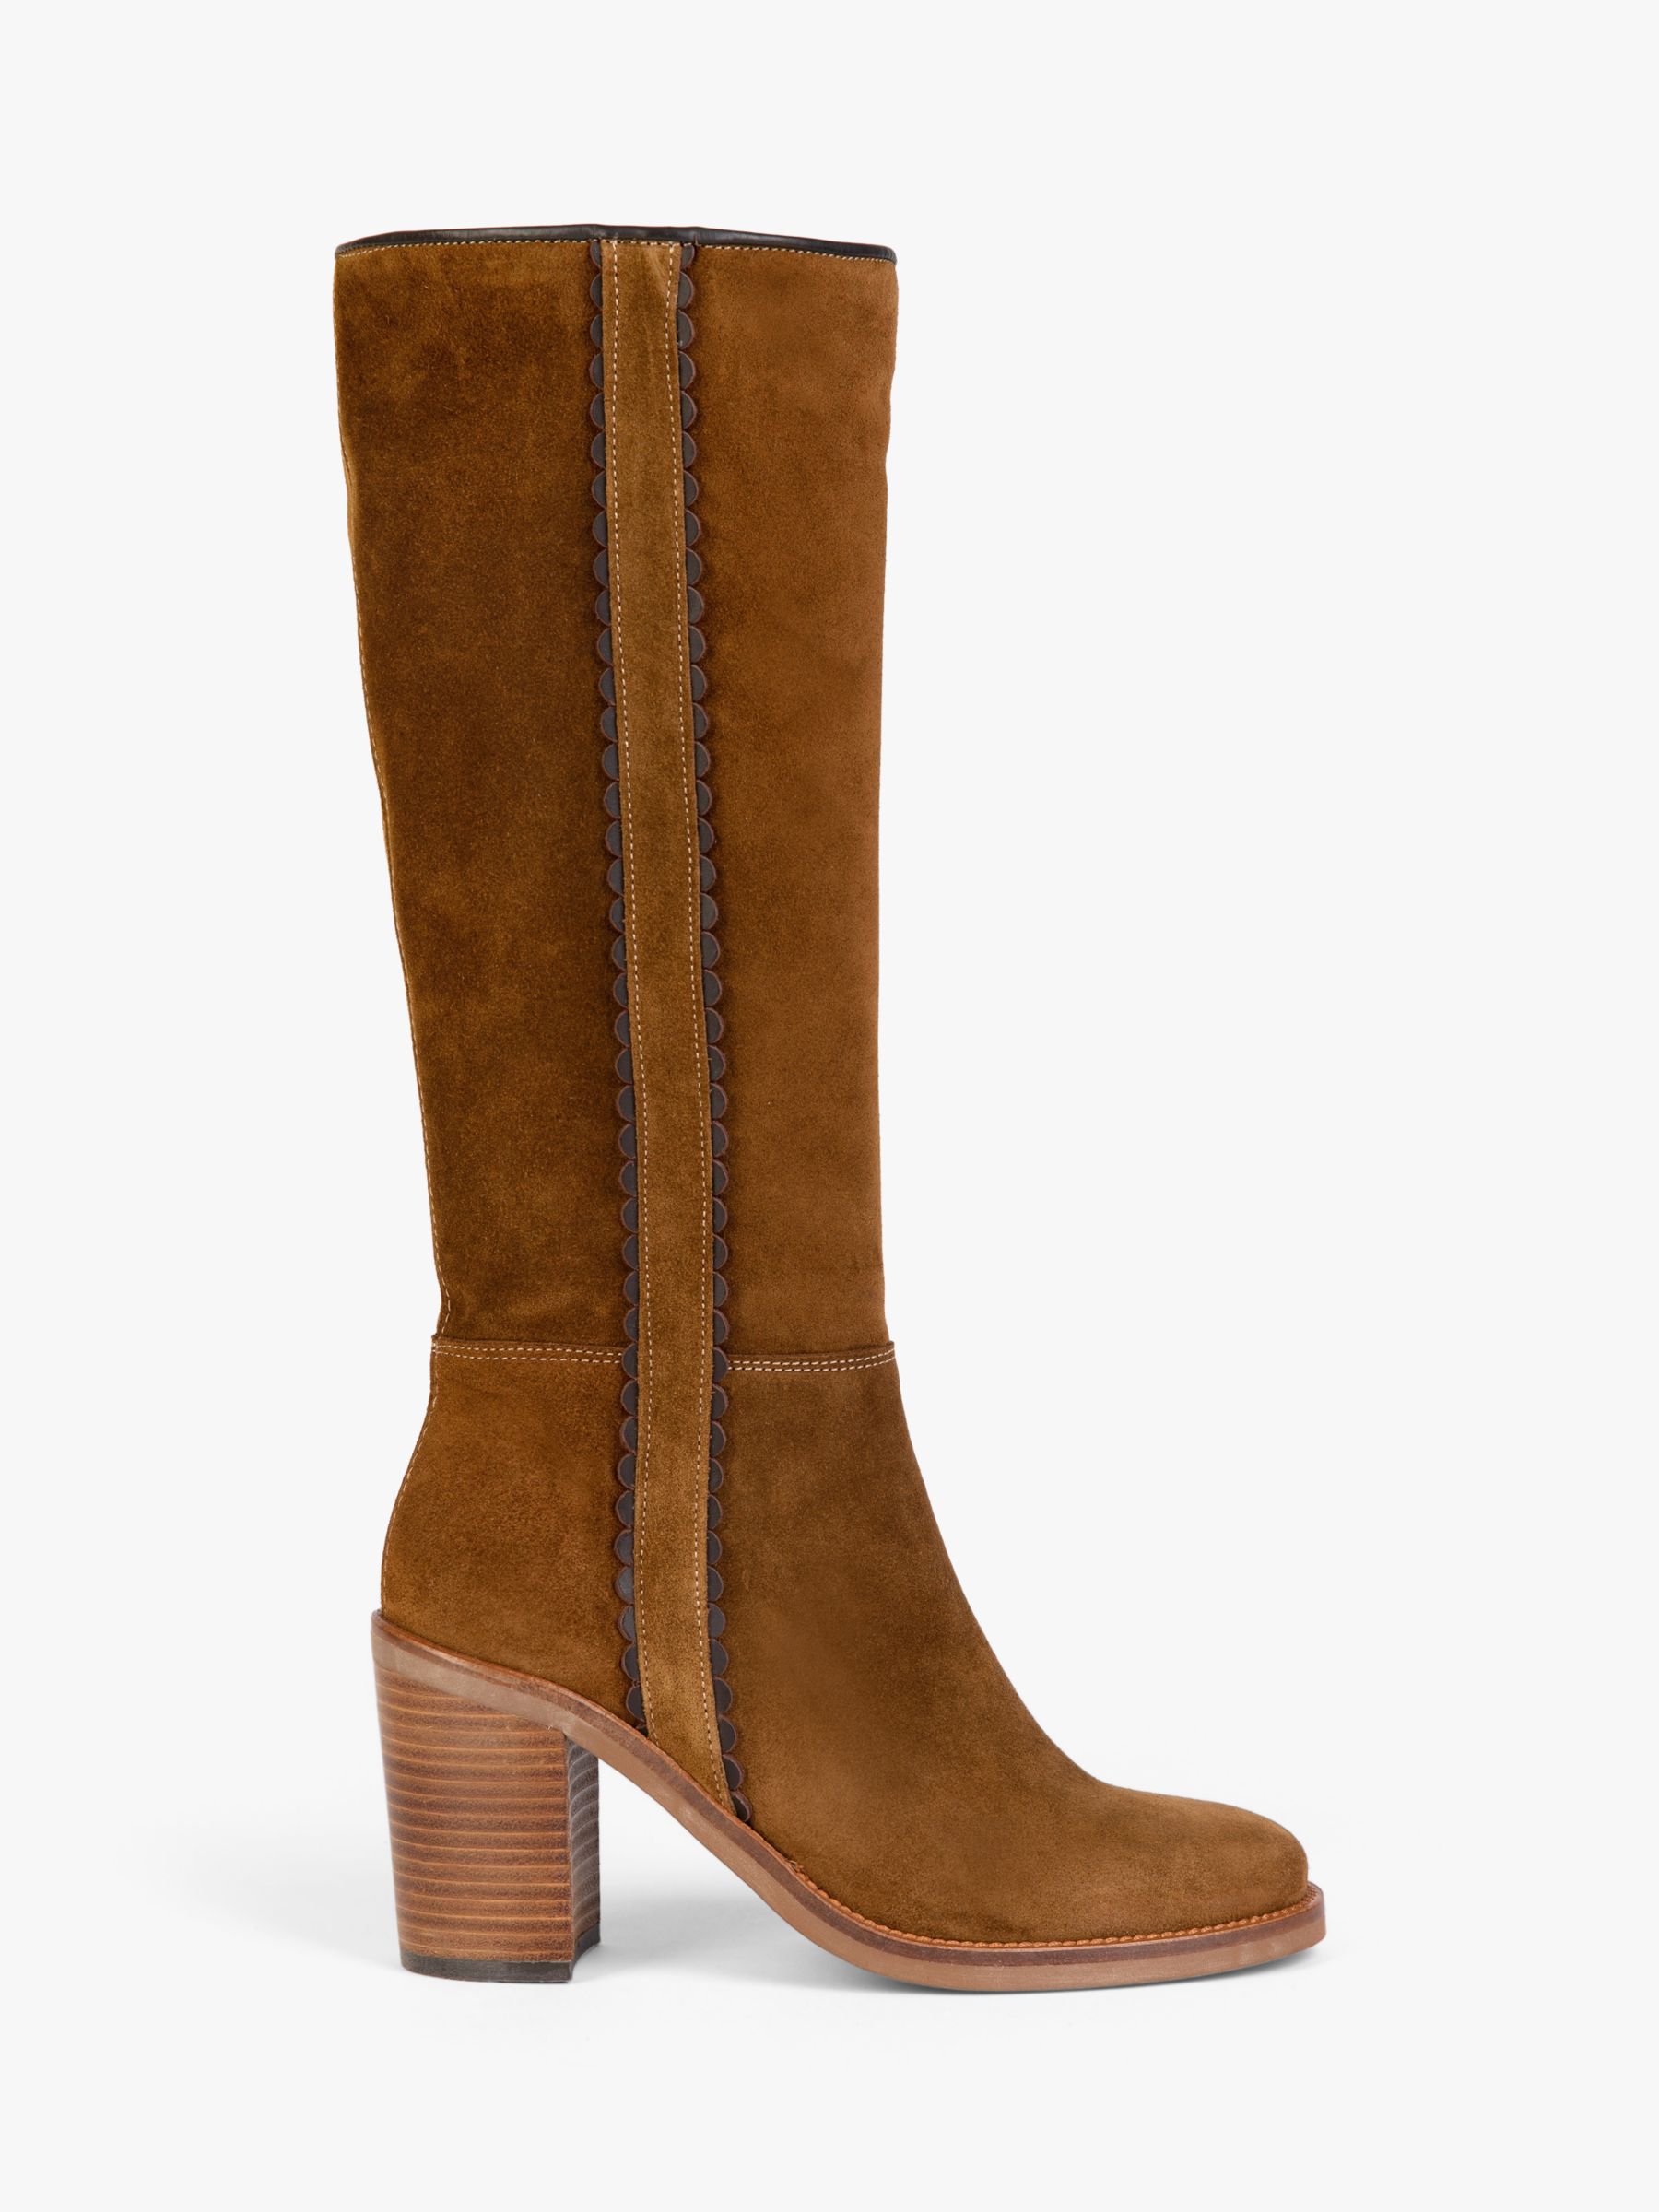 Penelope Chilvers Lucia Suede Knee High Boots, Peat